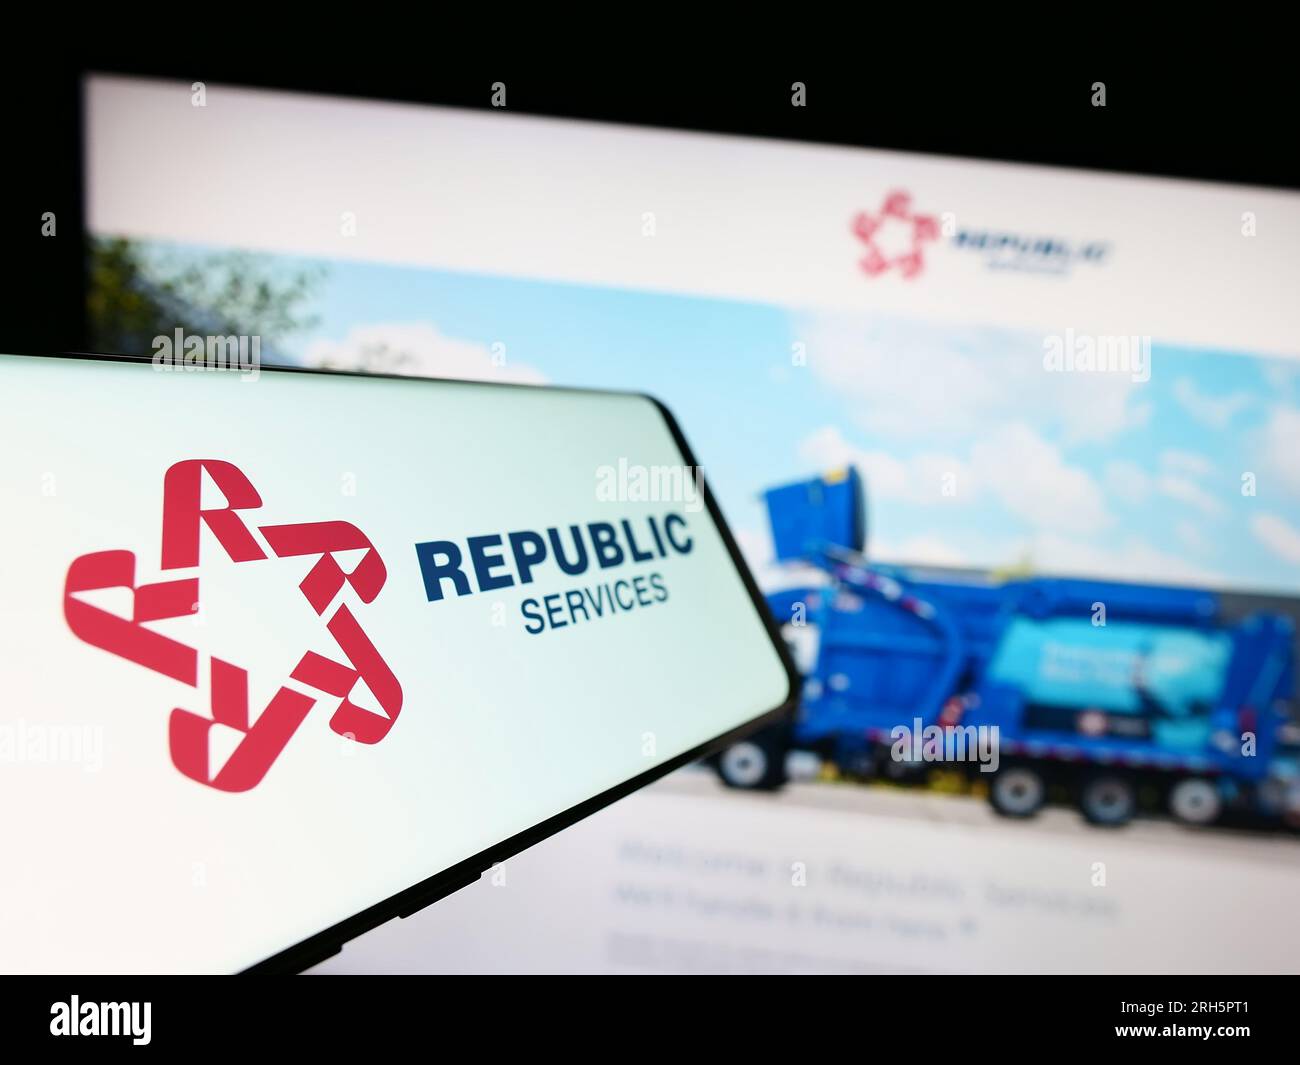 Mobile phone with logo of US waste disposal company Republic Services Inc. on screen in front of website. Focus on center-left of phone display. Stock Photo